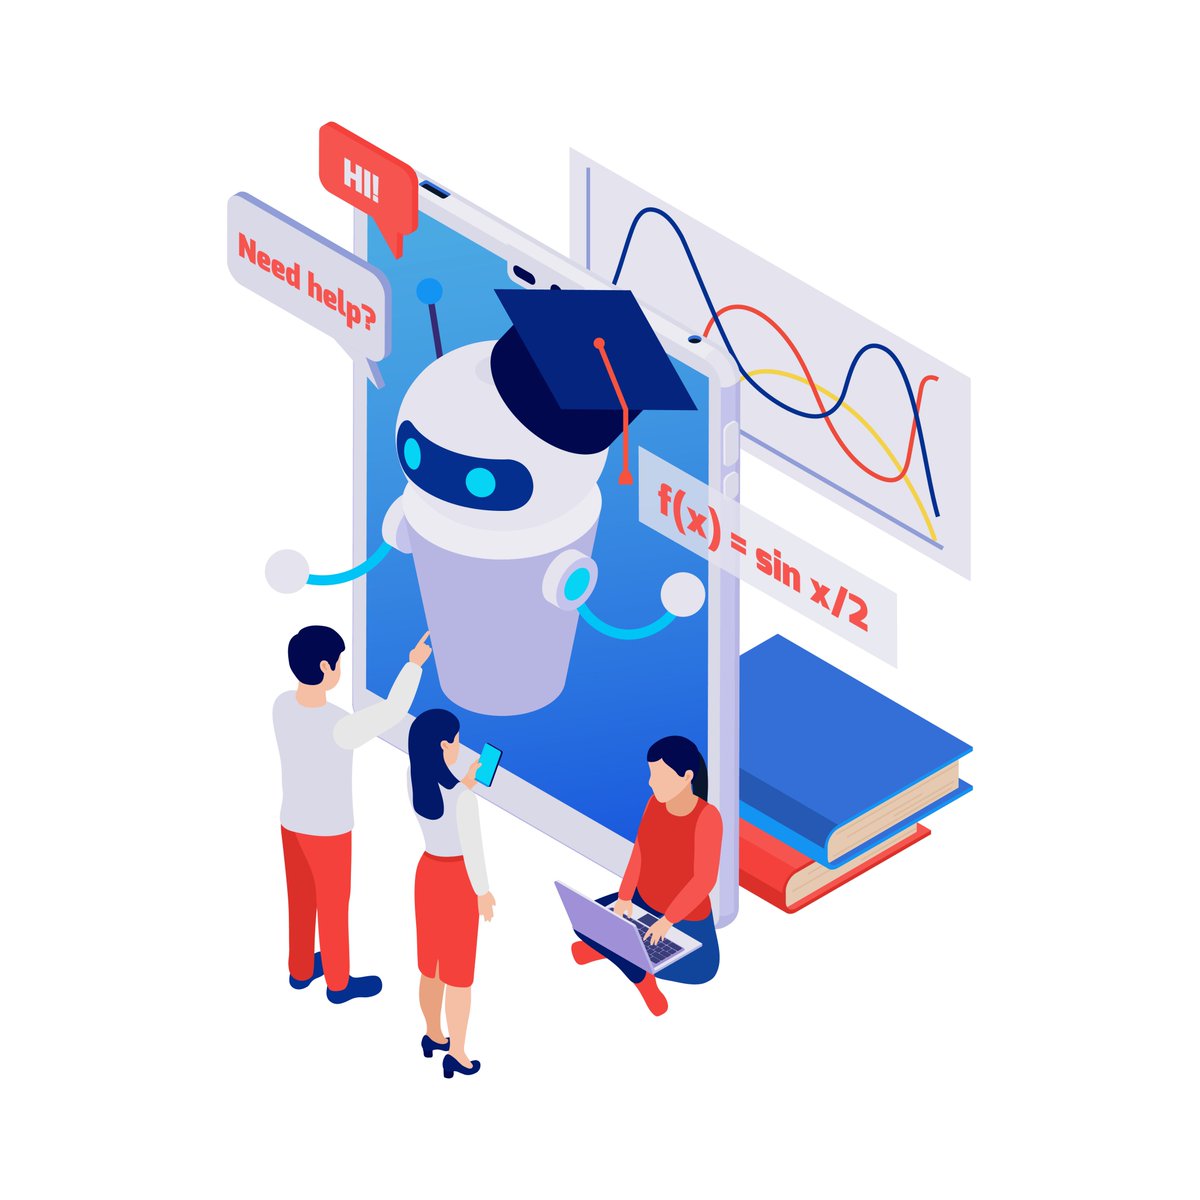 AI-driven adaptive learning pathways are personalized, efficient, and tailored to each learner's needs. 🤖📚 Say hello to a smarter way of acquiring knowledge that adapts to your unique strengths and weaknesses. #AIAdaptiveLearning #PersonalizedEducation